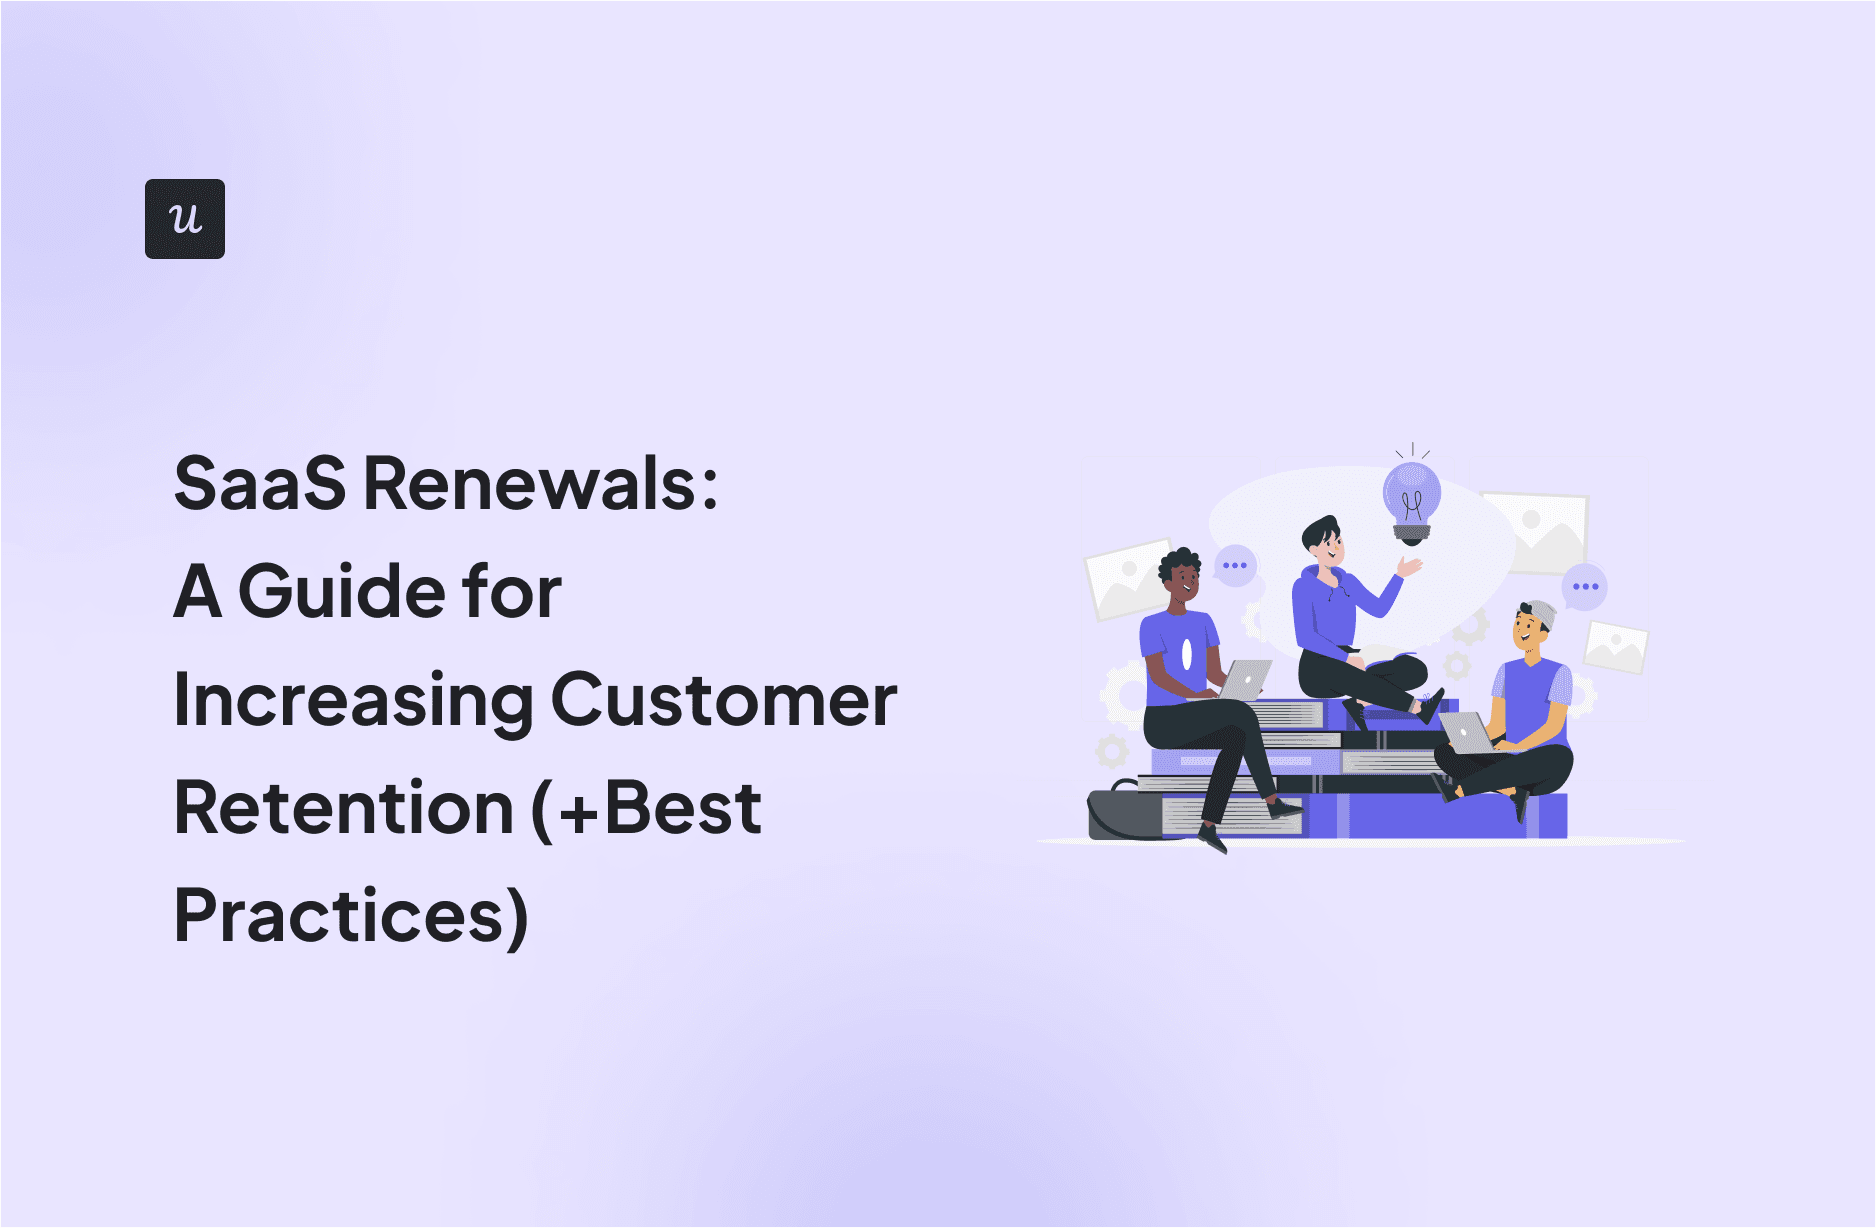 SaaS Renewals: A Guide for Increasing Customer Retention (+Best Practices) cover